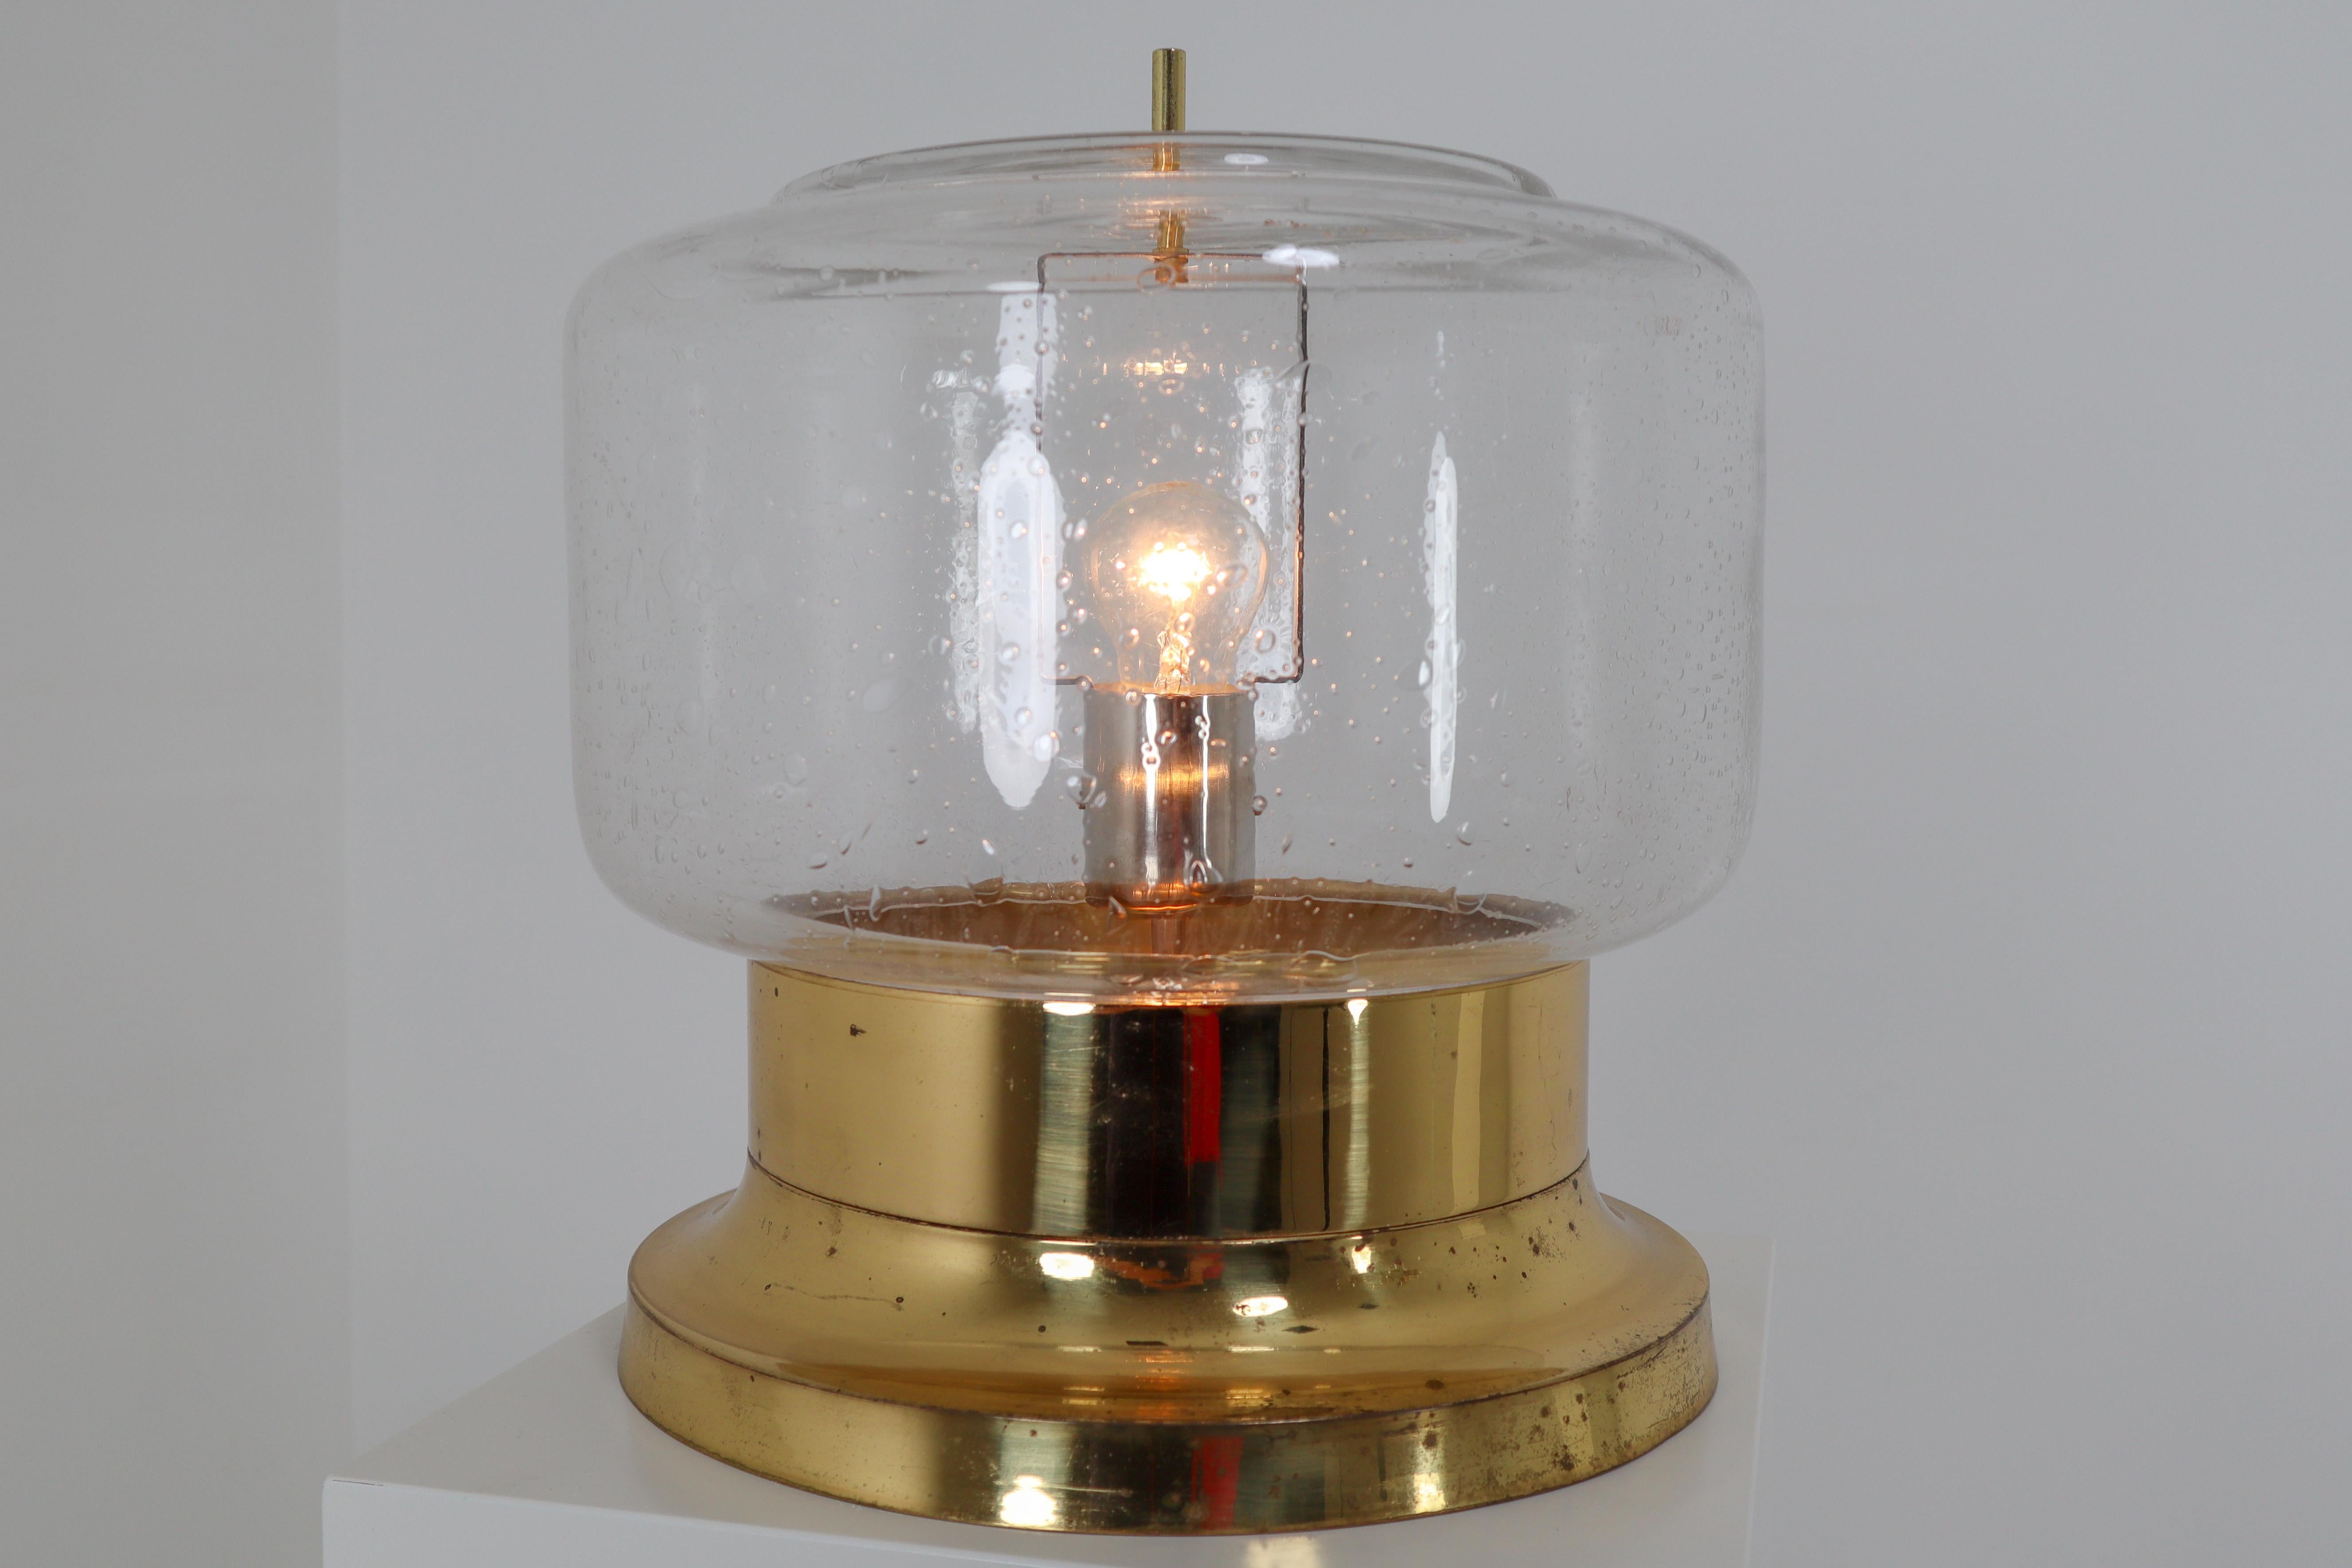 Large European midcentury table lamp, Austria, 1960s. The handblown clear glass contains air bubbles of varying sizes and density that create a wonderful light effect. The base is made of solid brass. These table lamp will contribute to a luxurious